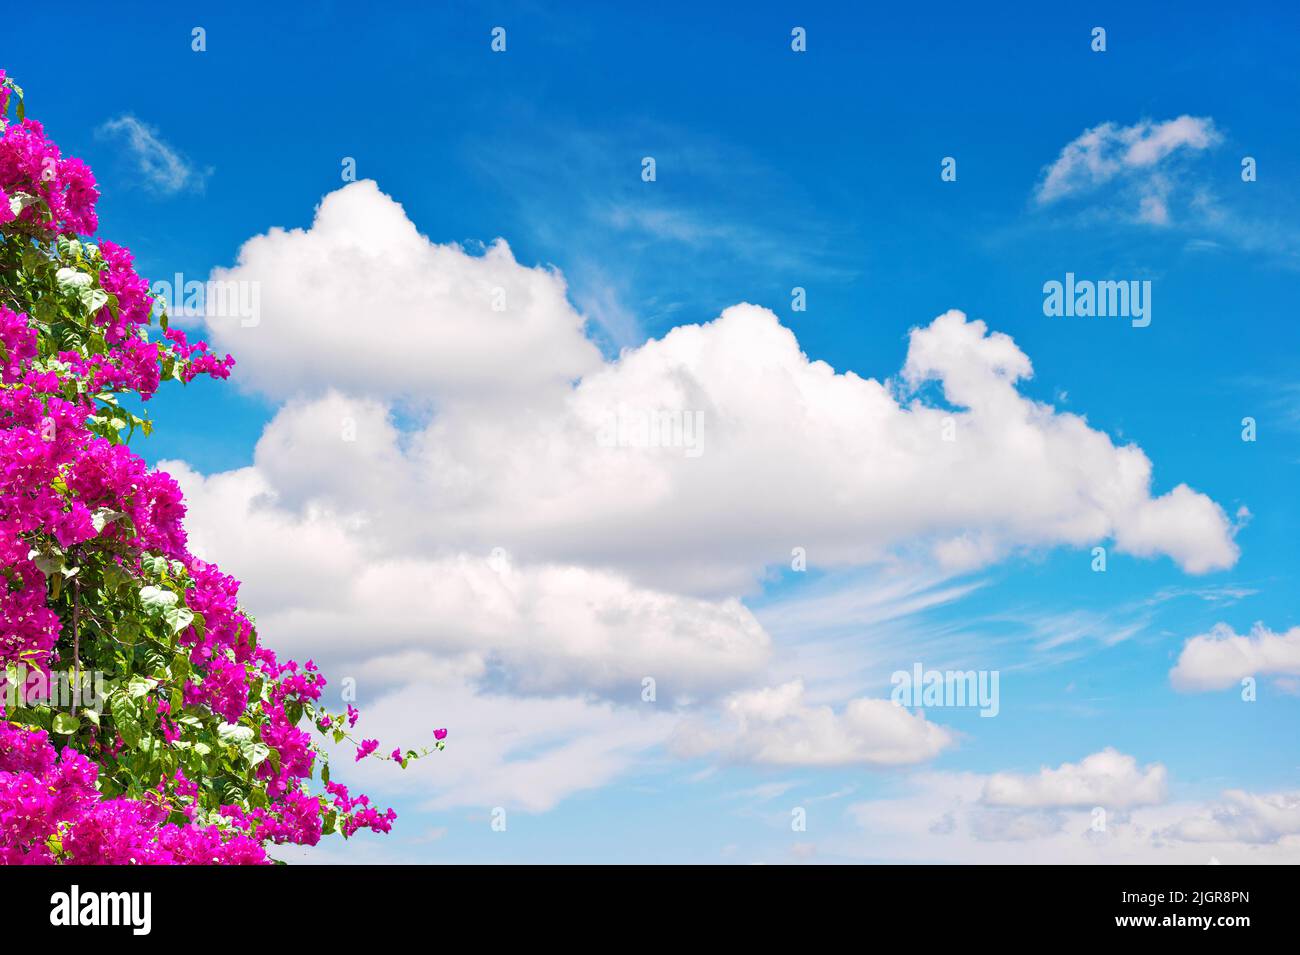 Pink summer rhododendron flowers over cloudy blue sky banner Stock Photo